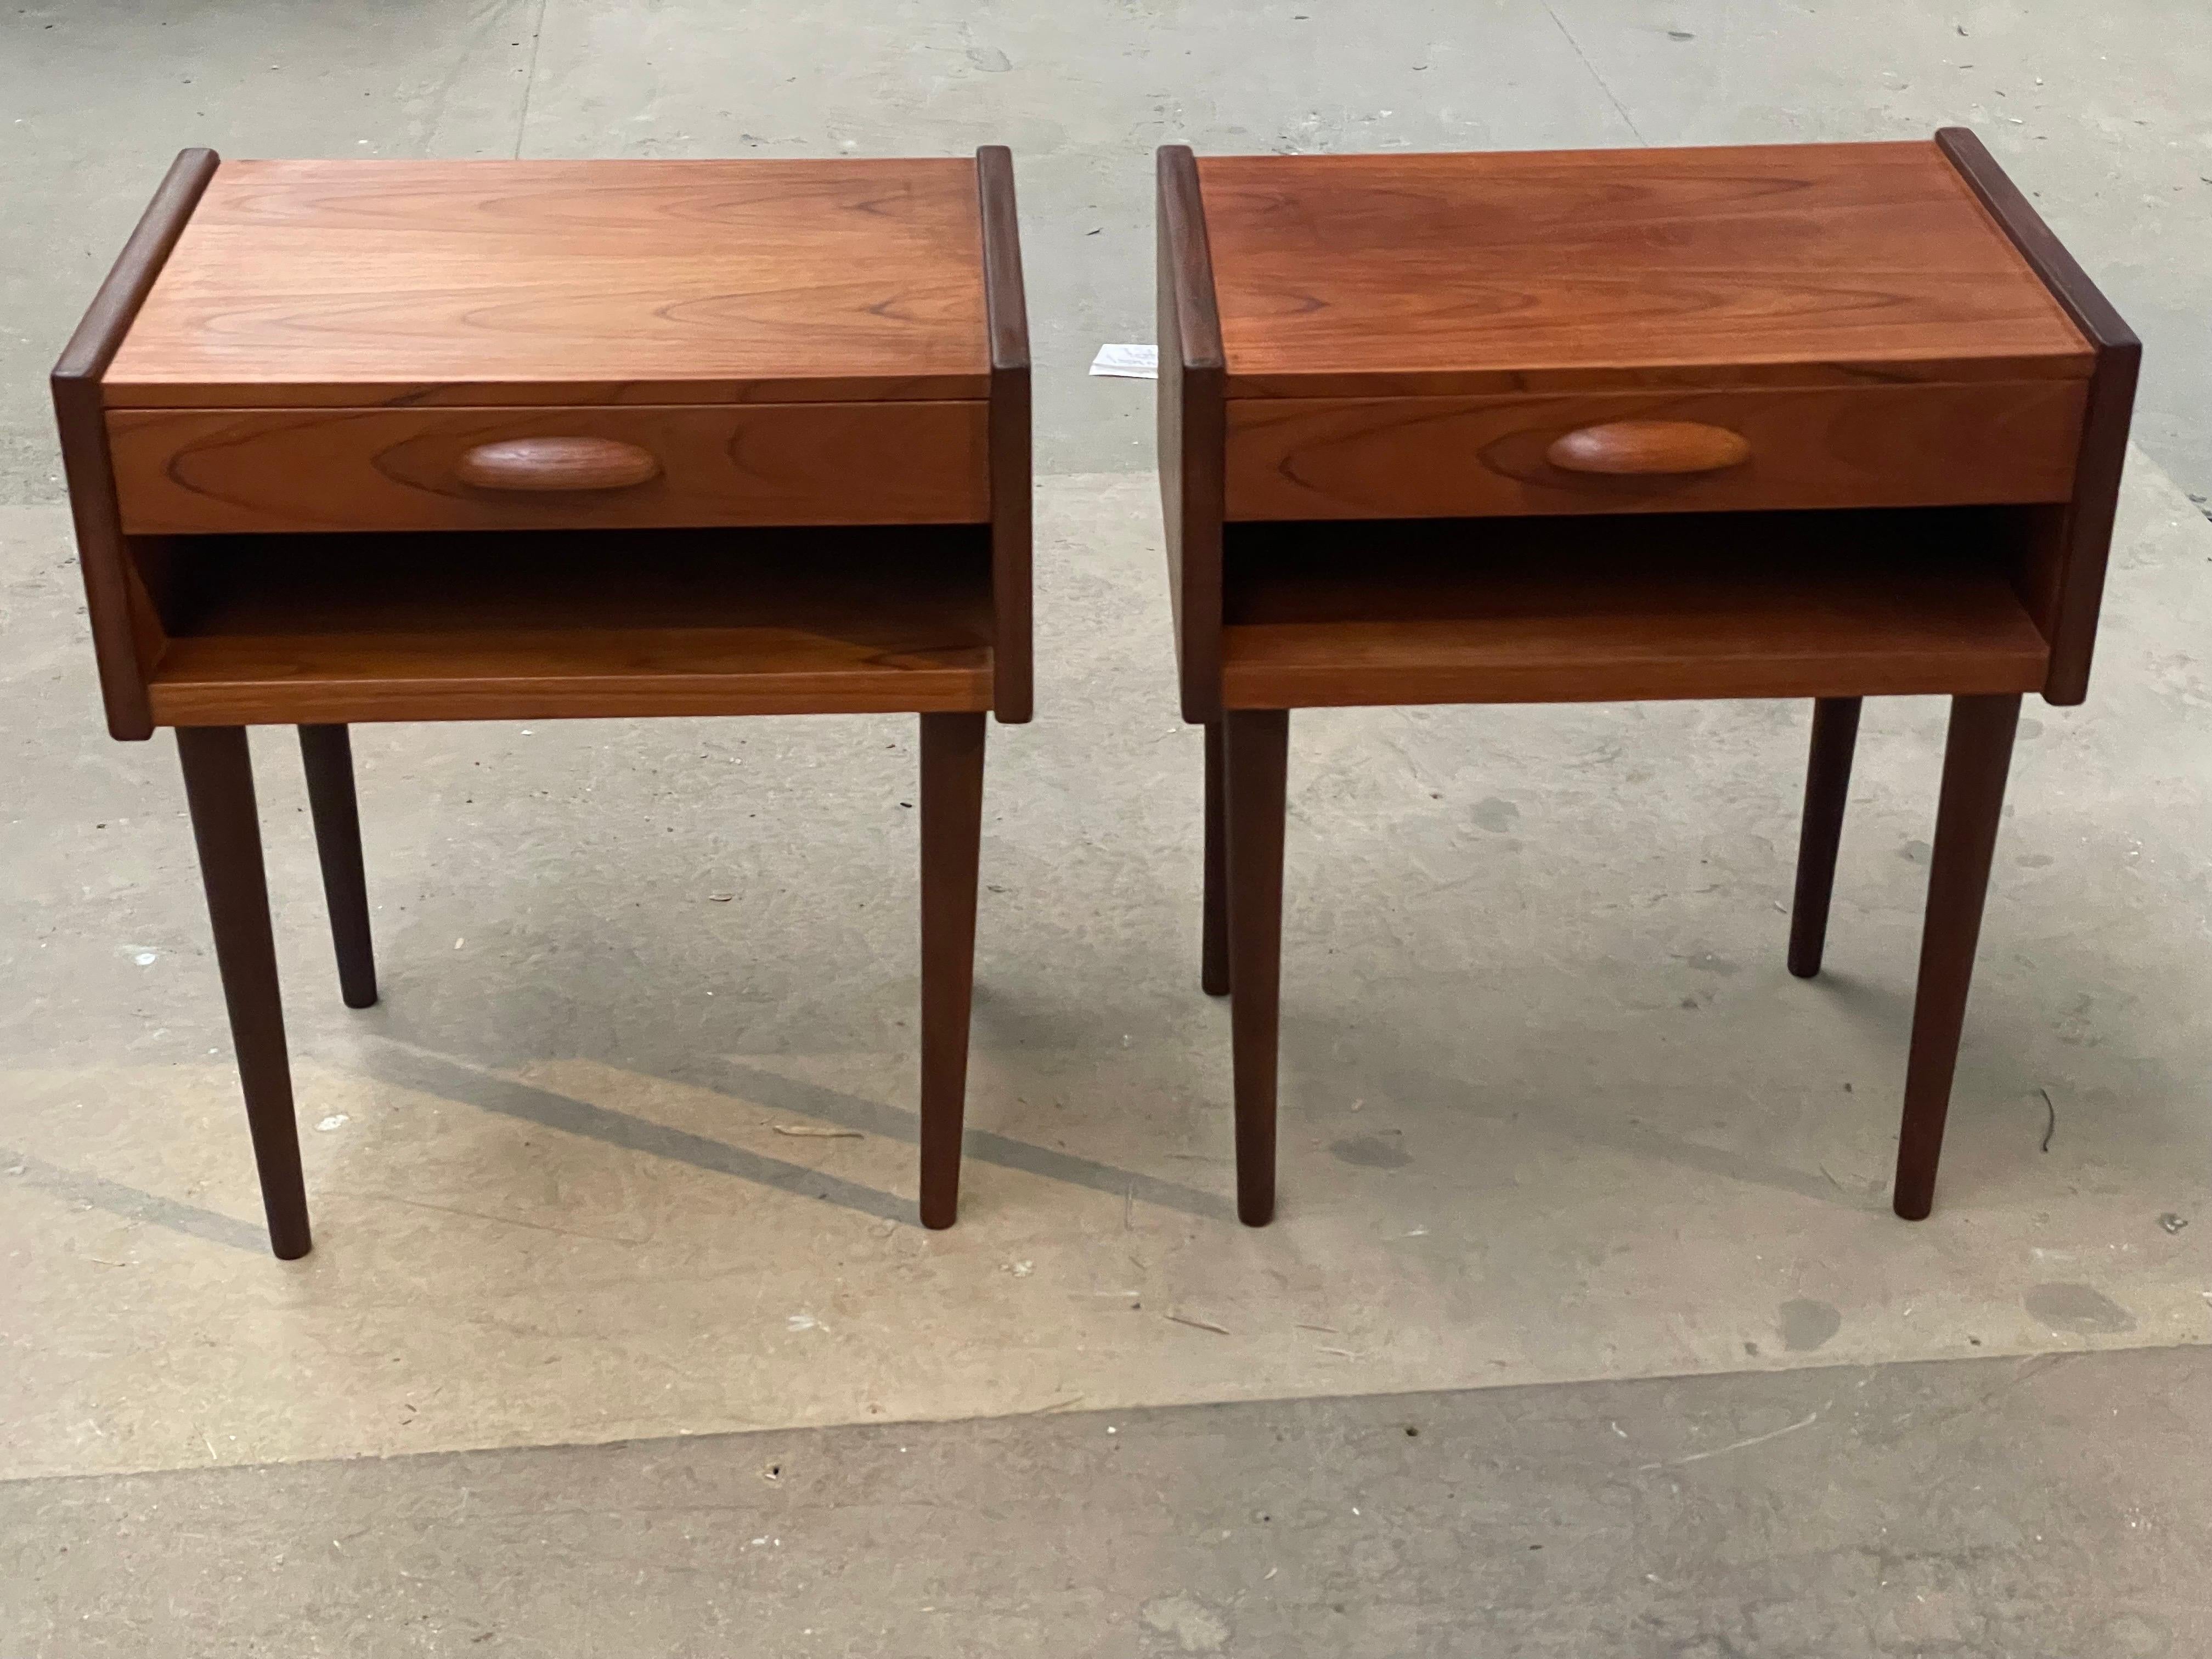 Pair of mid-century Danish teak nightstands, each equipped with a practical drawer and a lower shelf for added storage. The nightstands showcase elegant carved handles, enhancing their minimalist design. Crafted from durable teak wood, these pieces